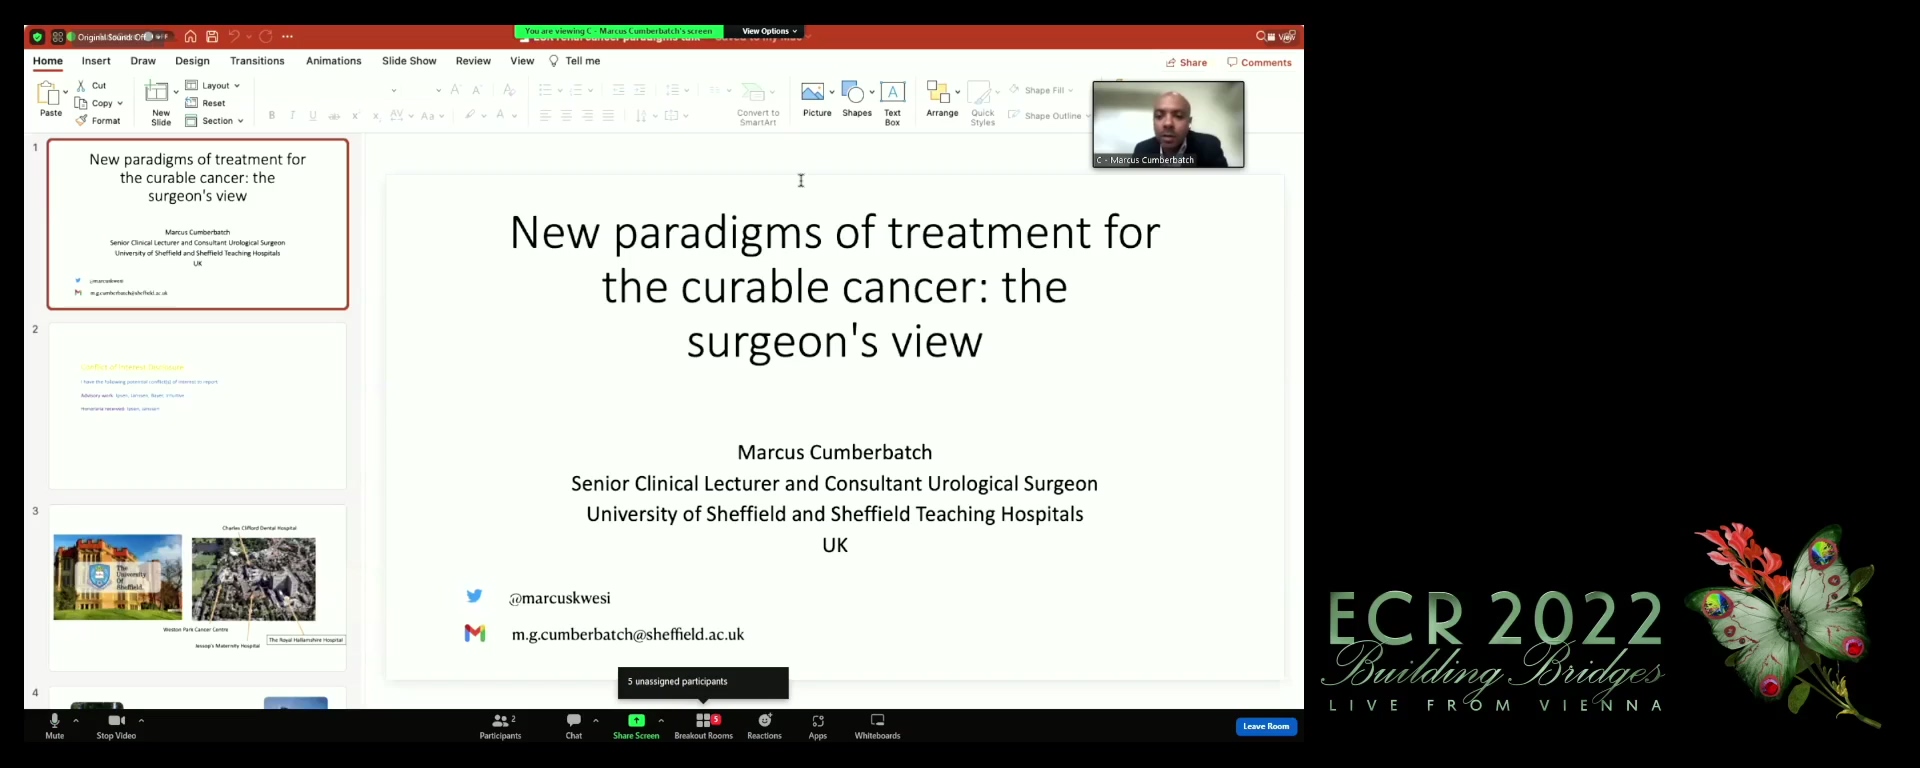 New paradigms of treatment for the curable cancer: the surgeon's view - Marcus Cumberbatch, Sheffield / UK